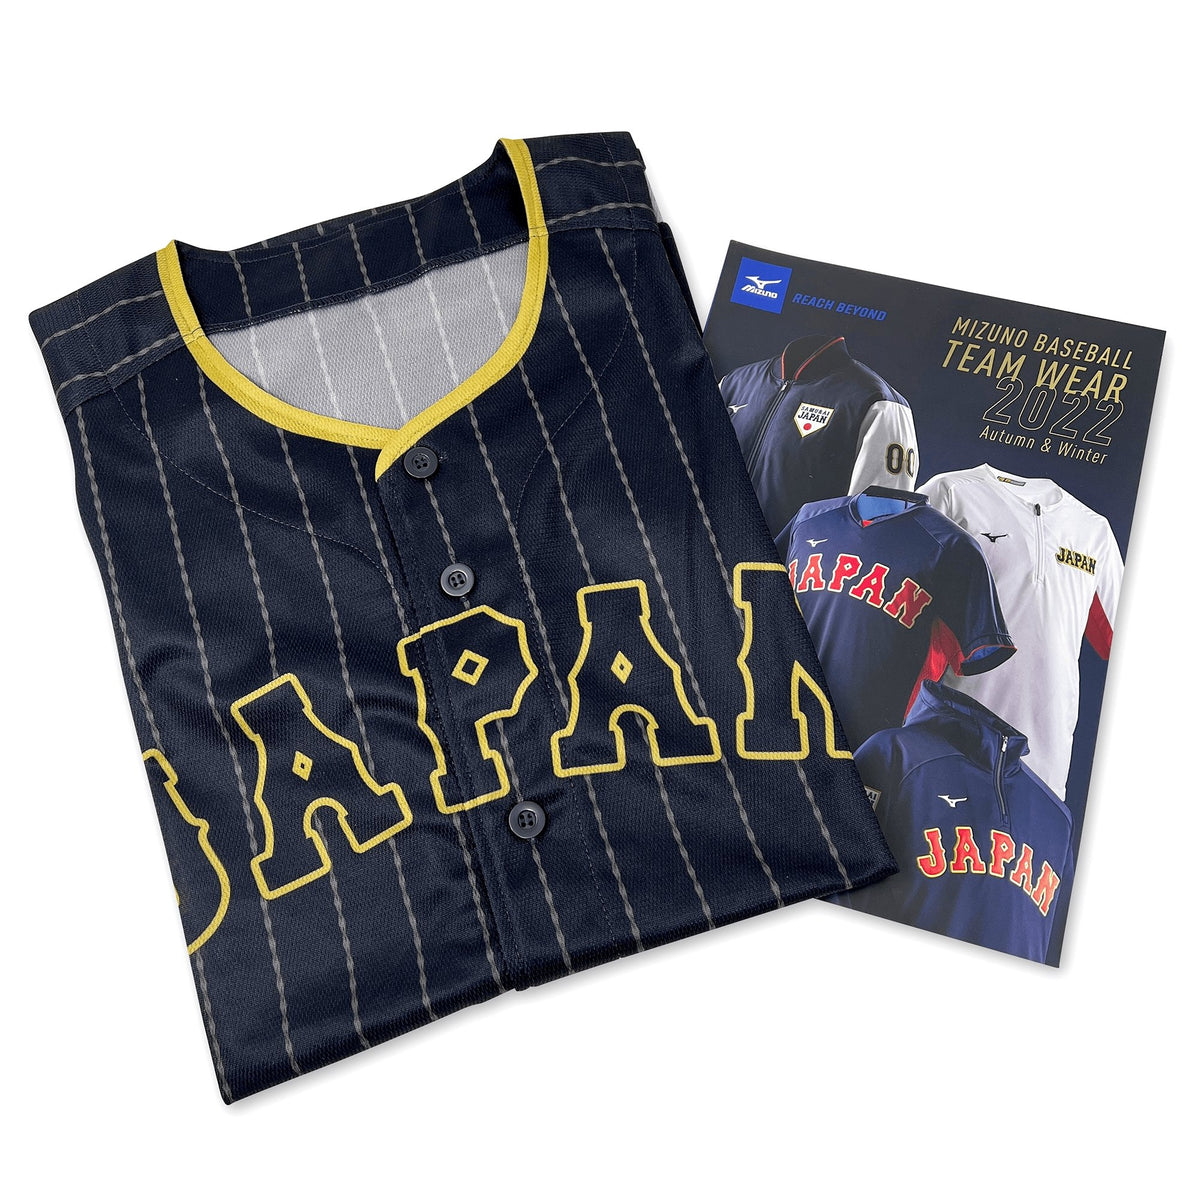 ohtani jersey in japanese